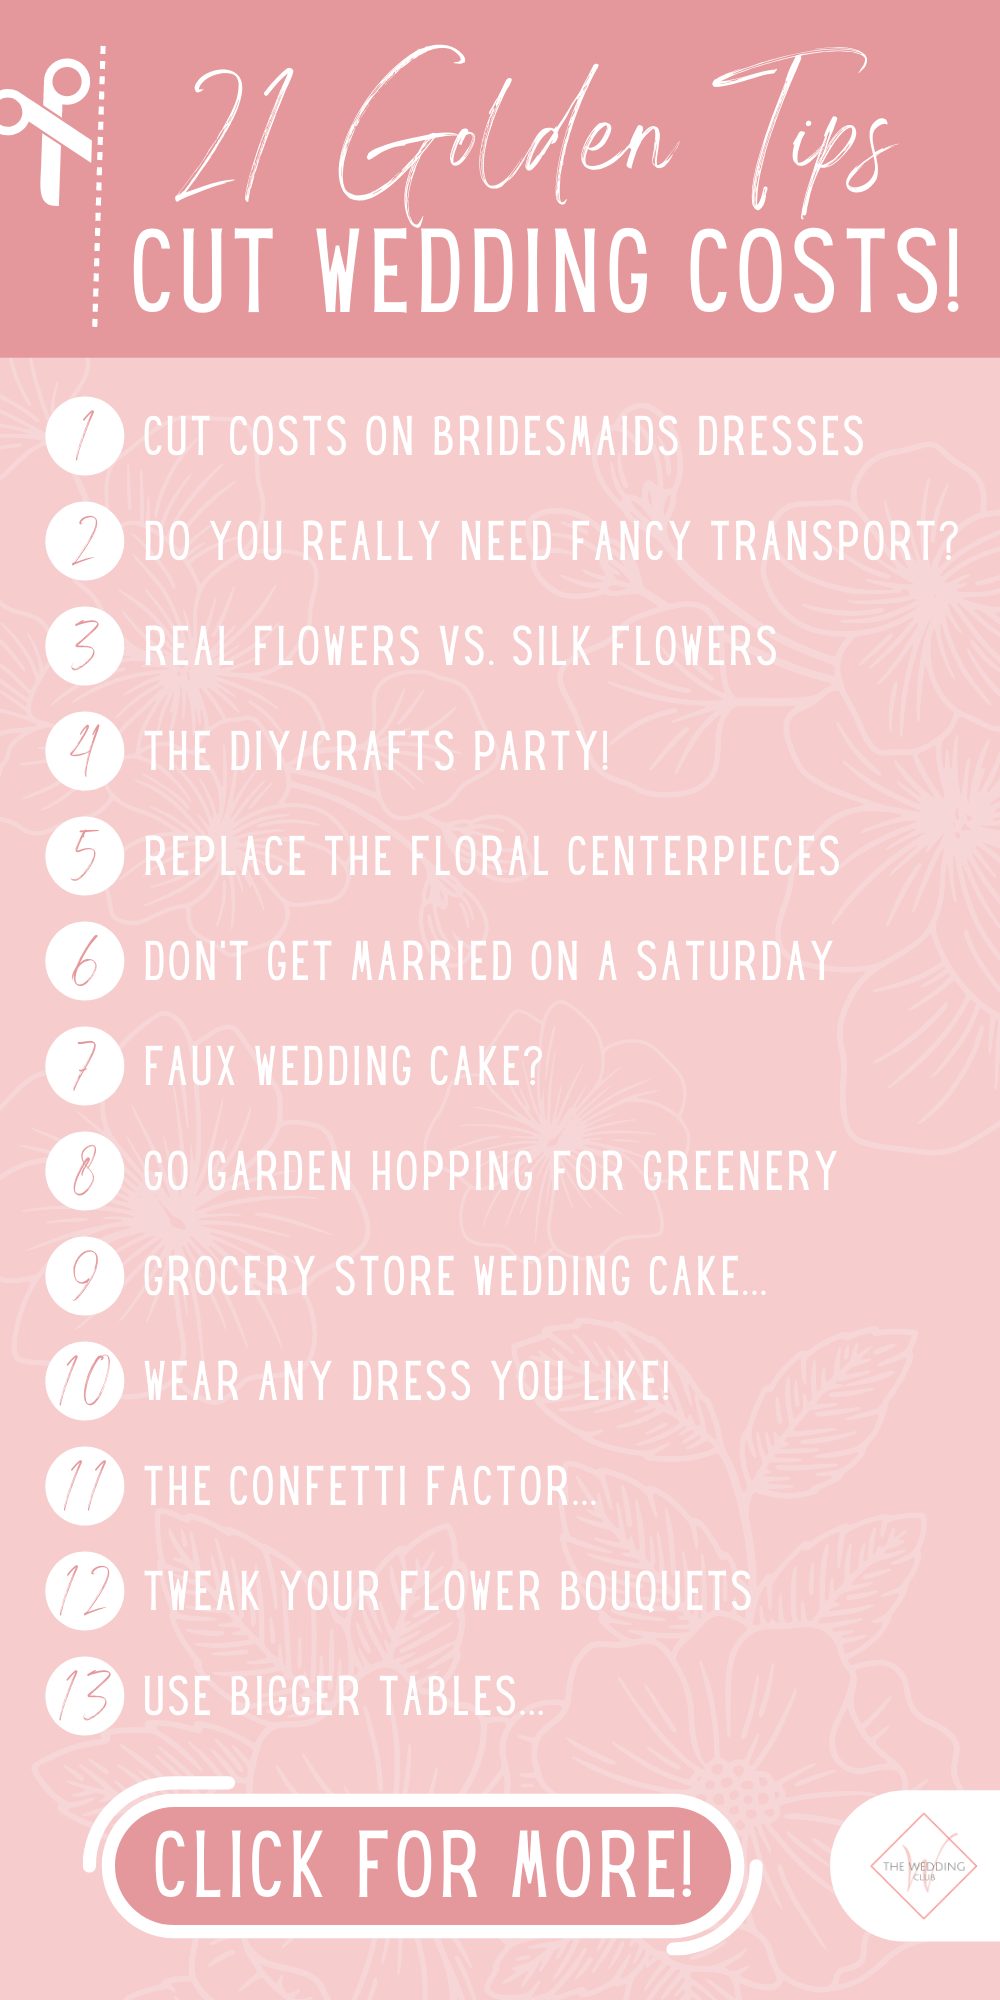 21 Golden Tips for cutting wedding costs-infographic